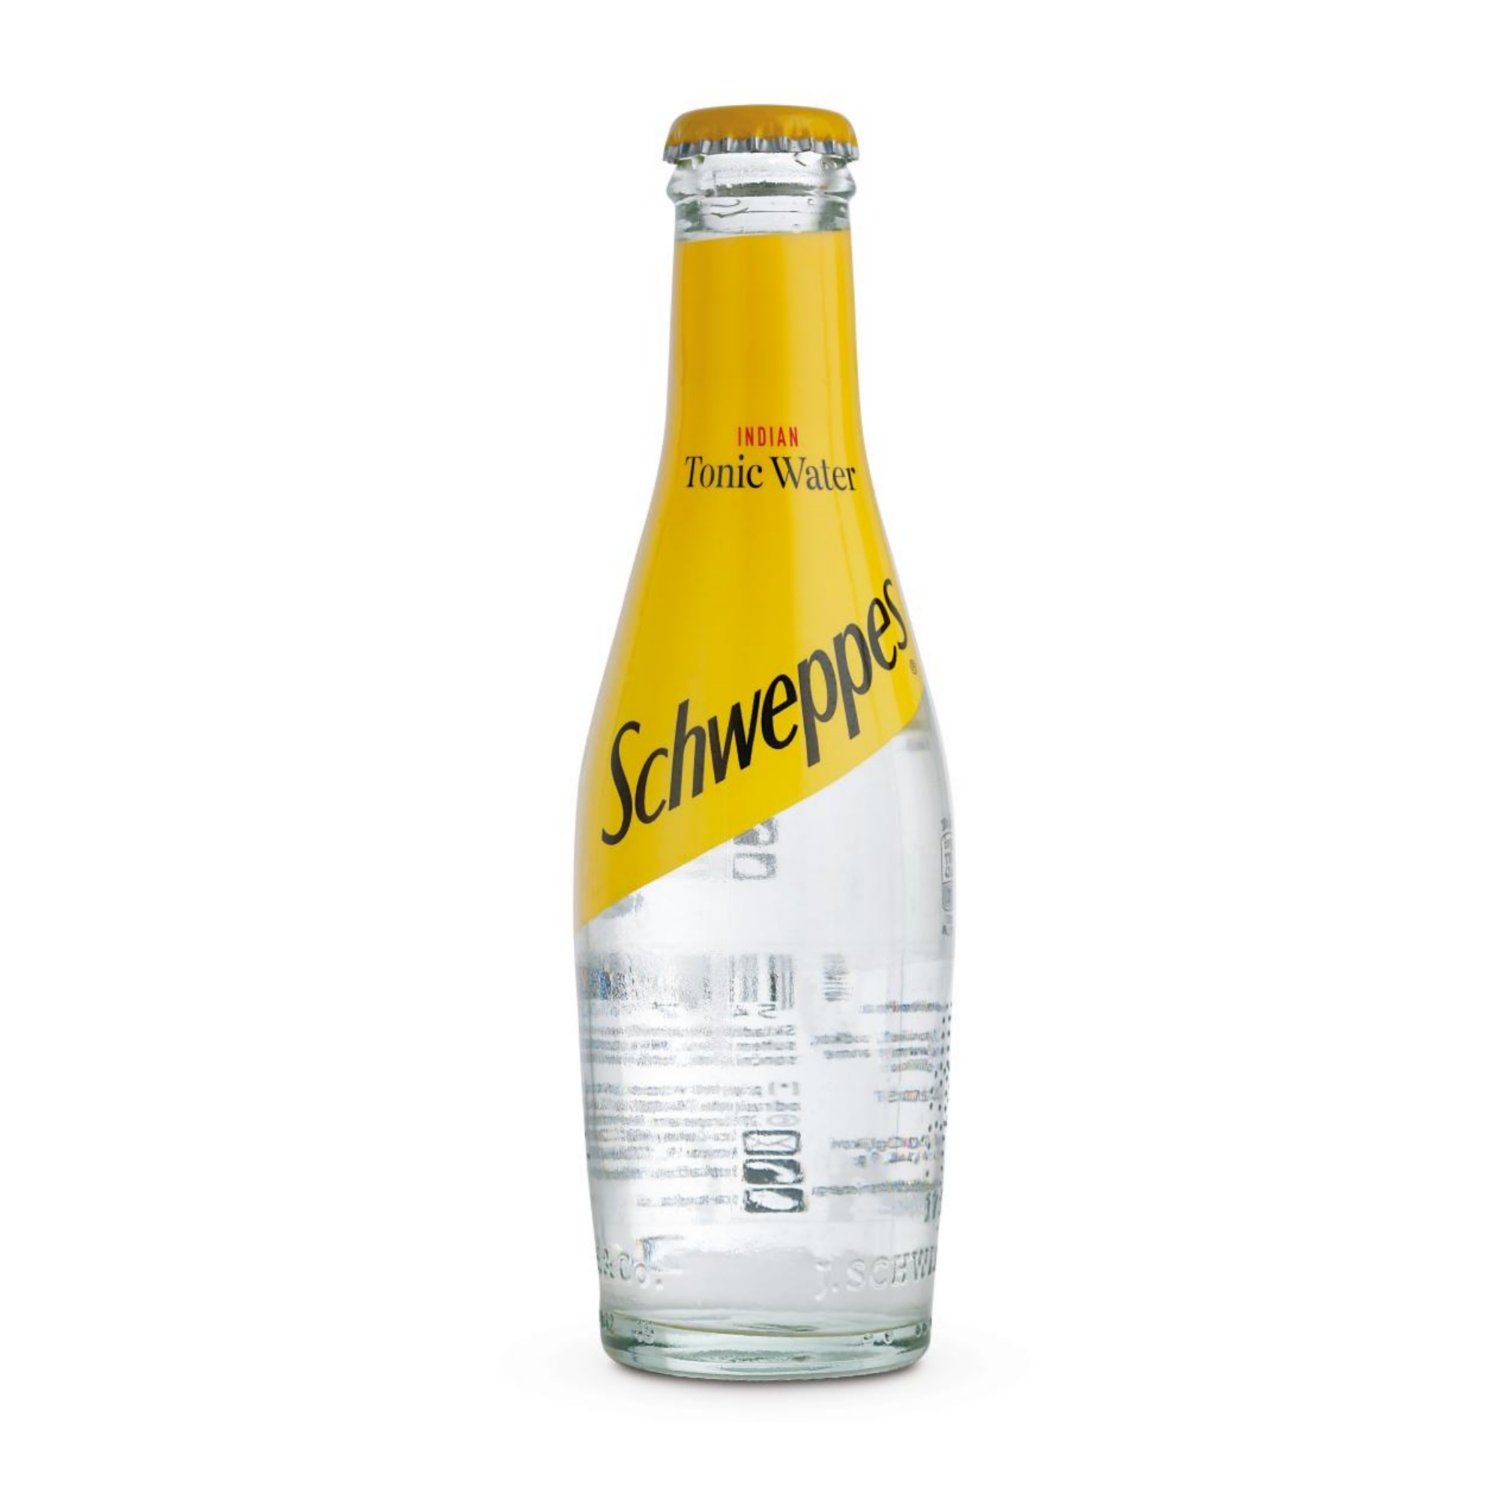 SCHWEPPES Tonic Water Indian